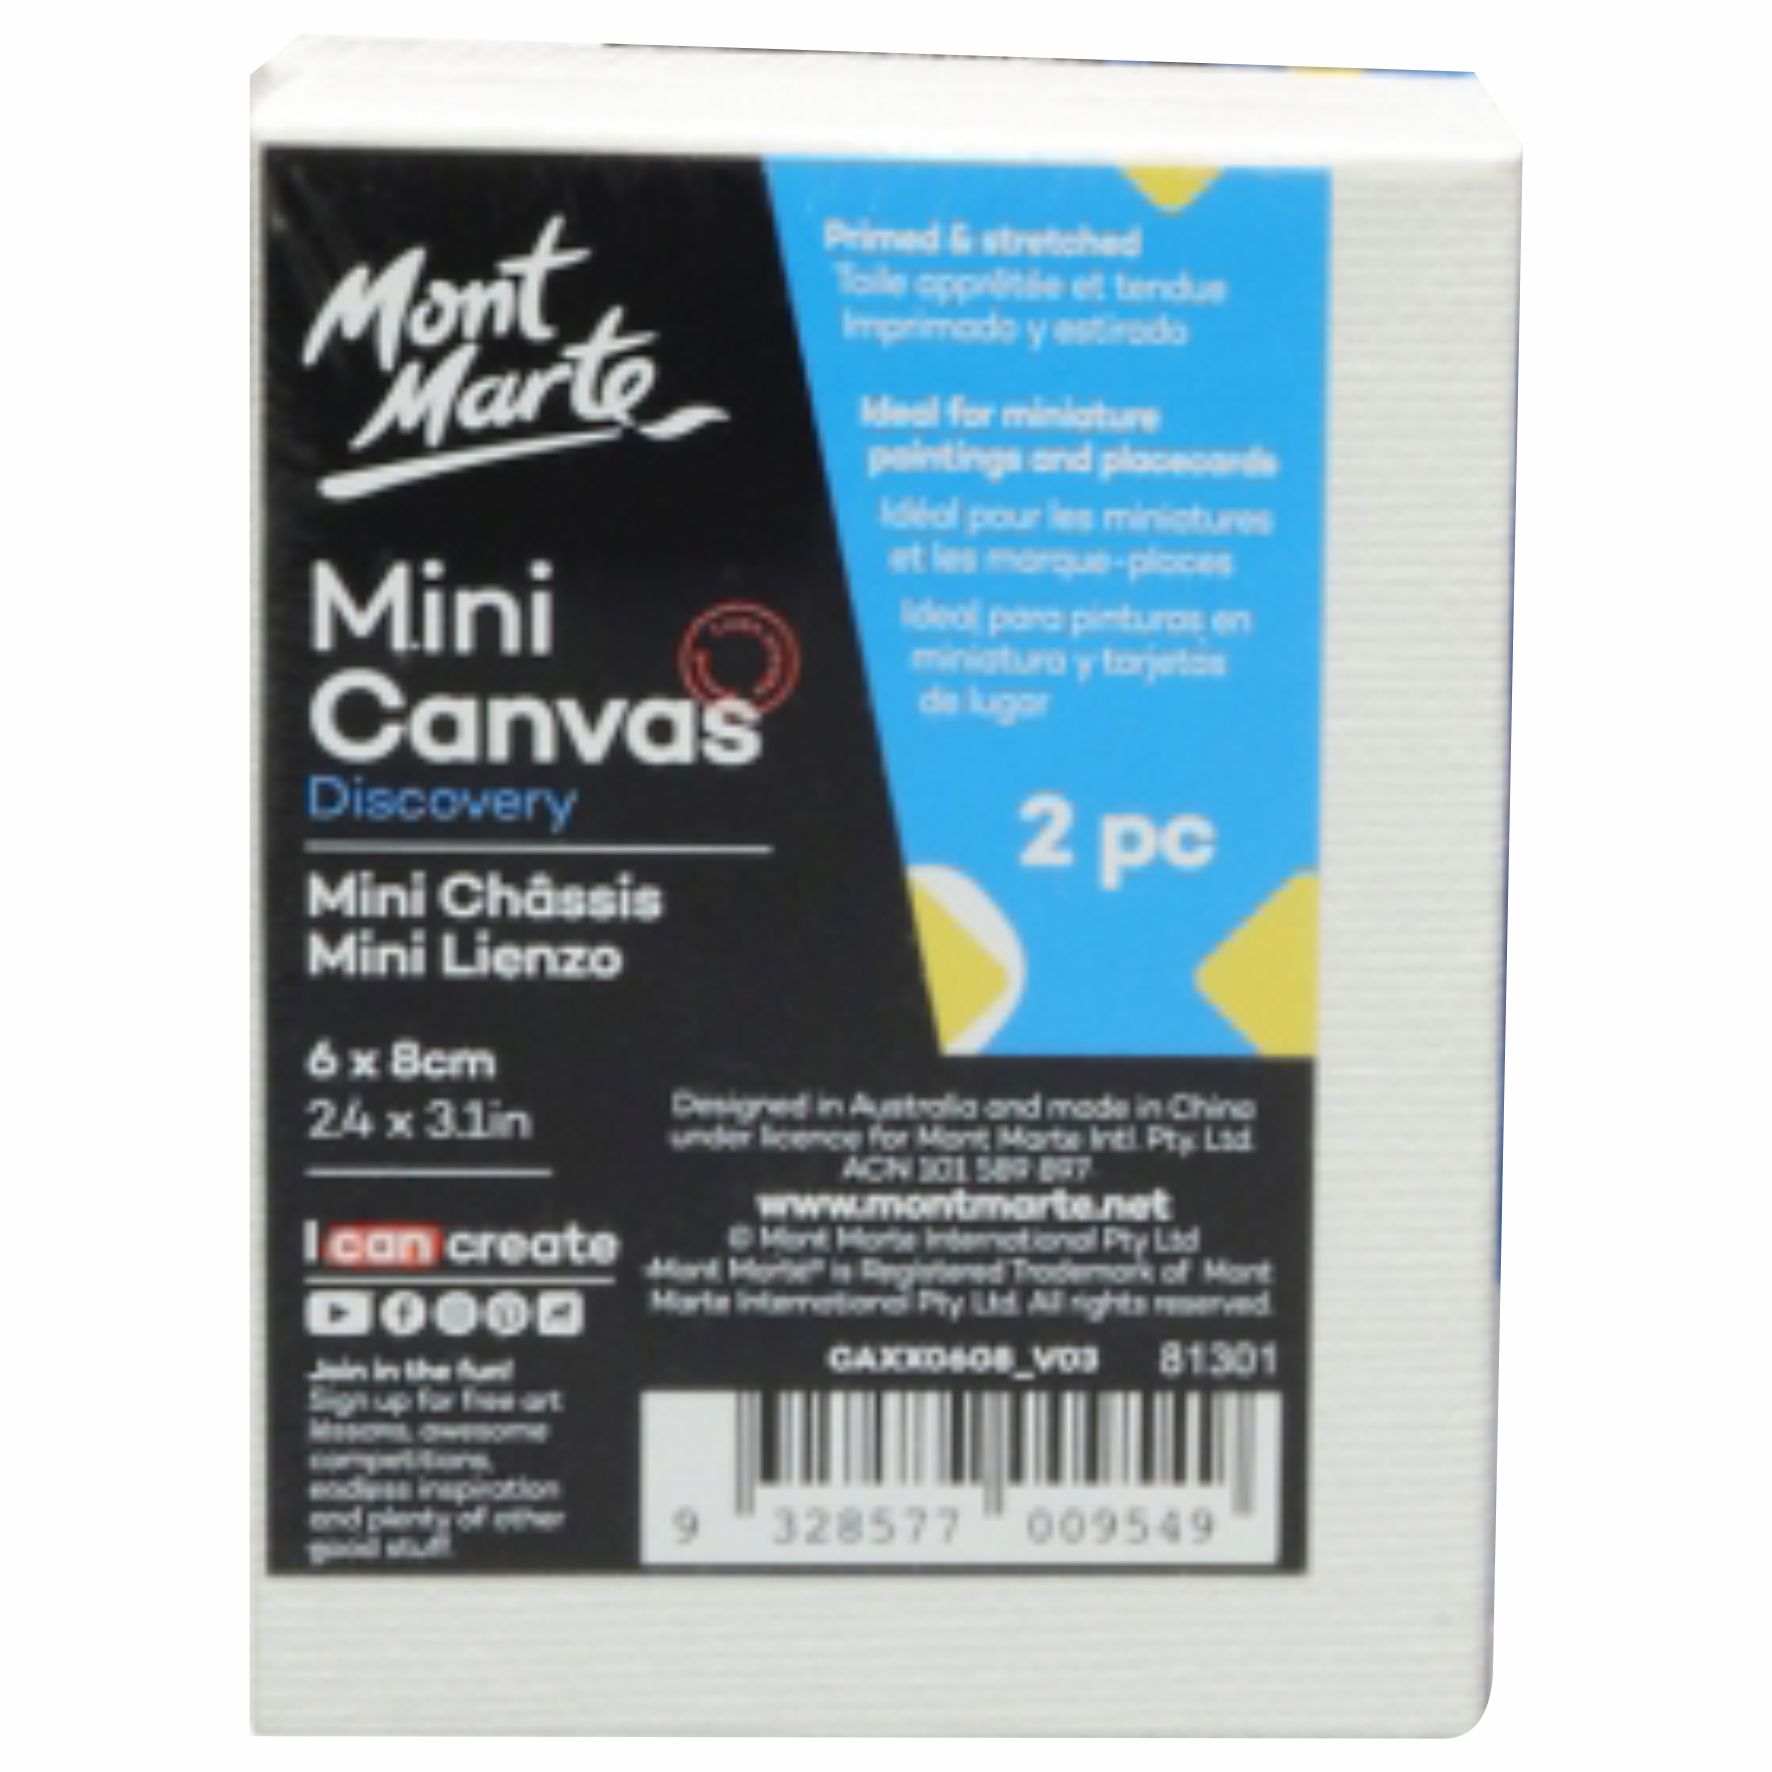 Mont Marte Mini Canvas 6x8cm Stretched Small Canvas& Primed Plastic Frame 2pcs Shrinked- 36 Pack Ideal for Miniature Paintings and Place Cards